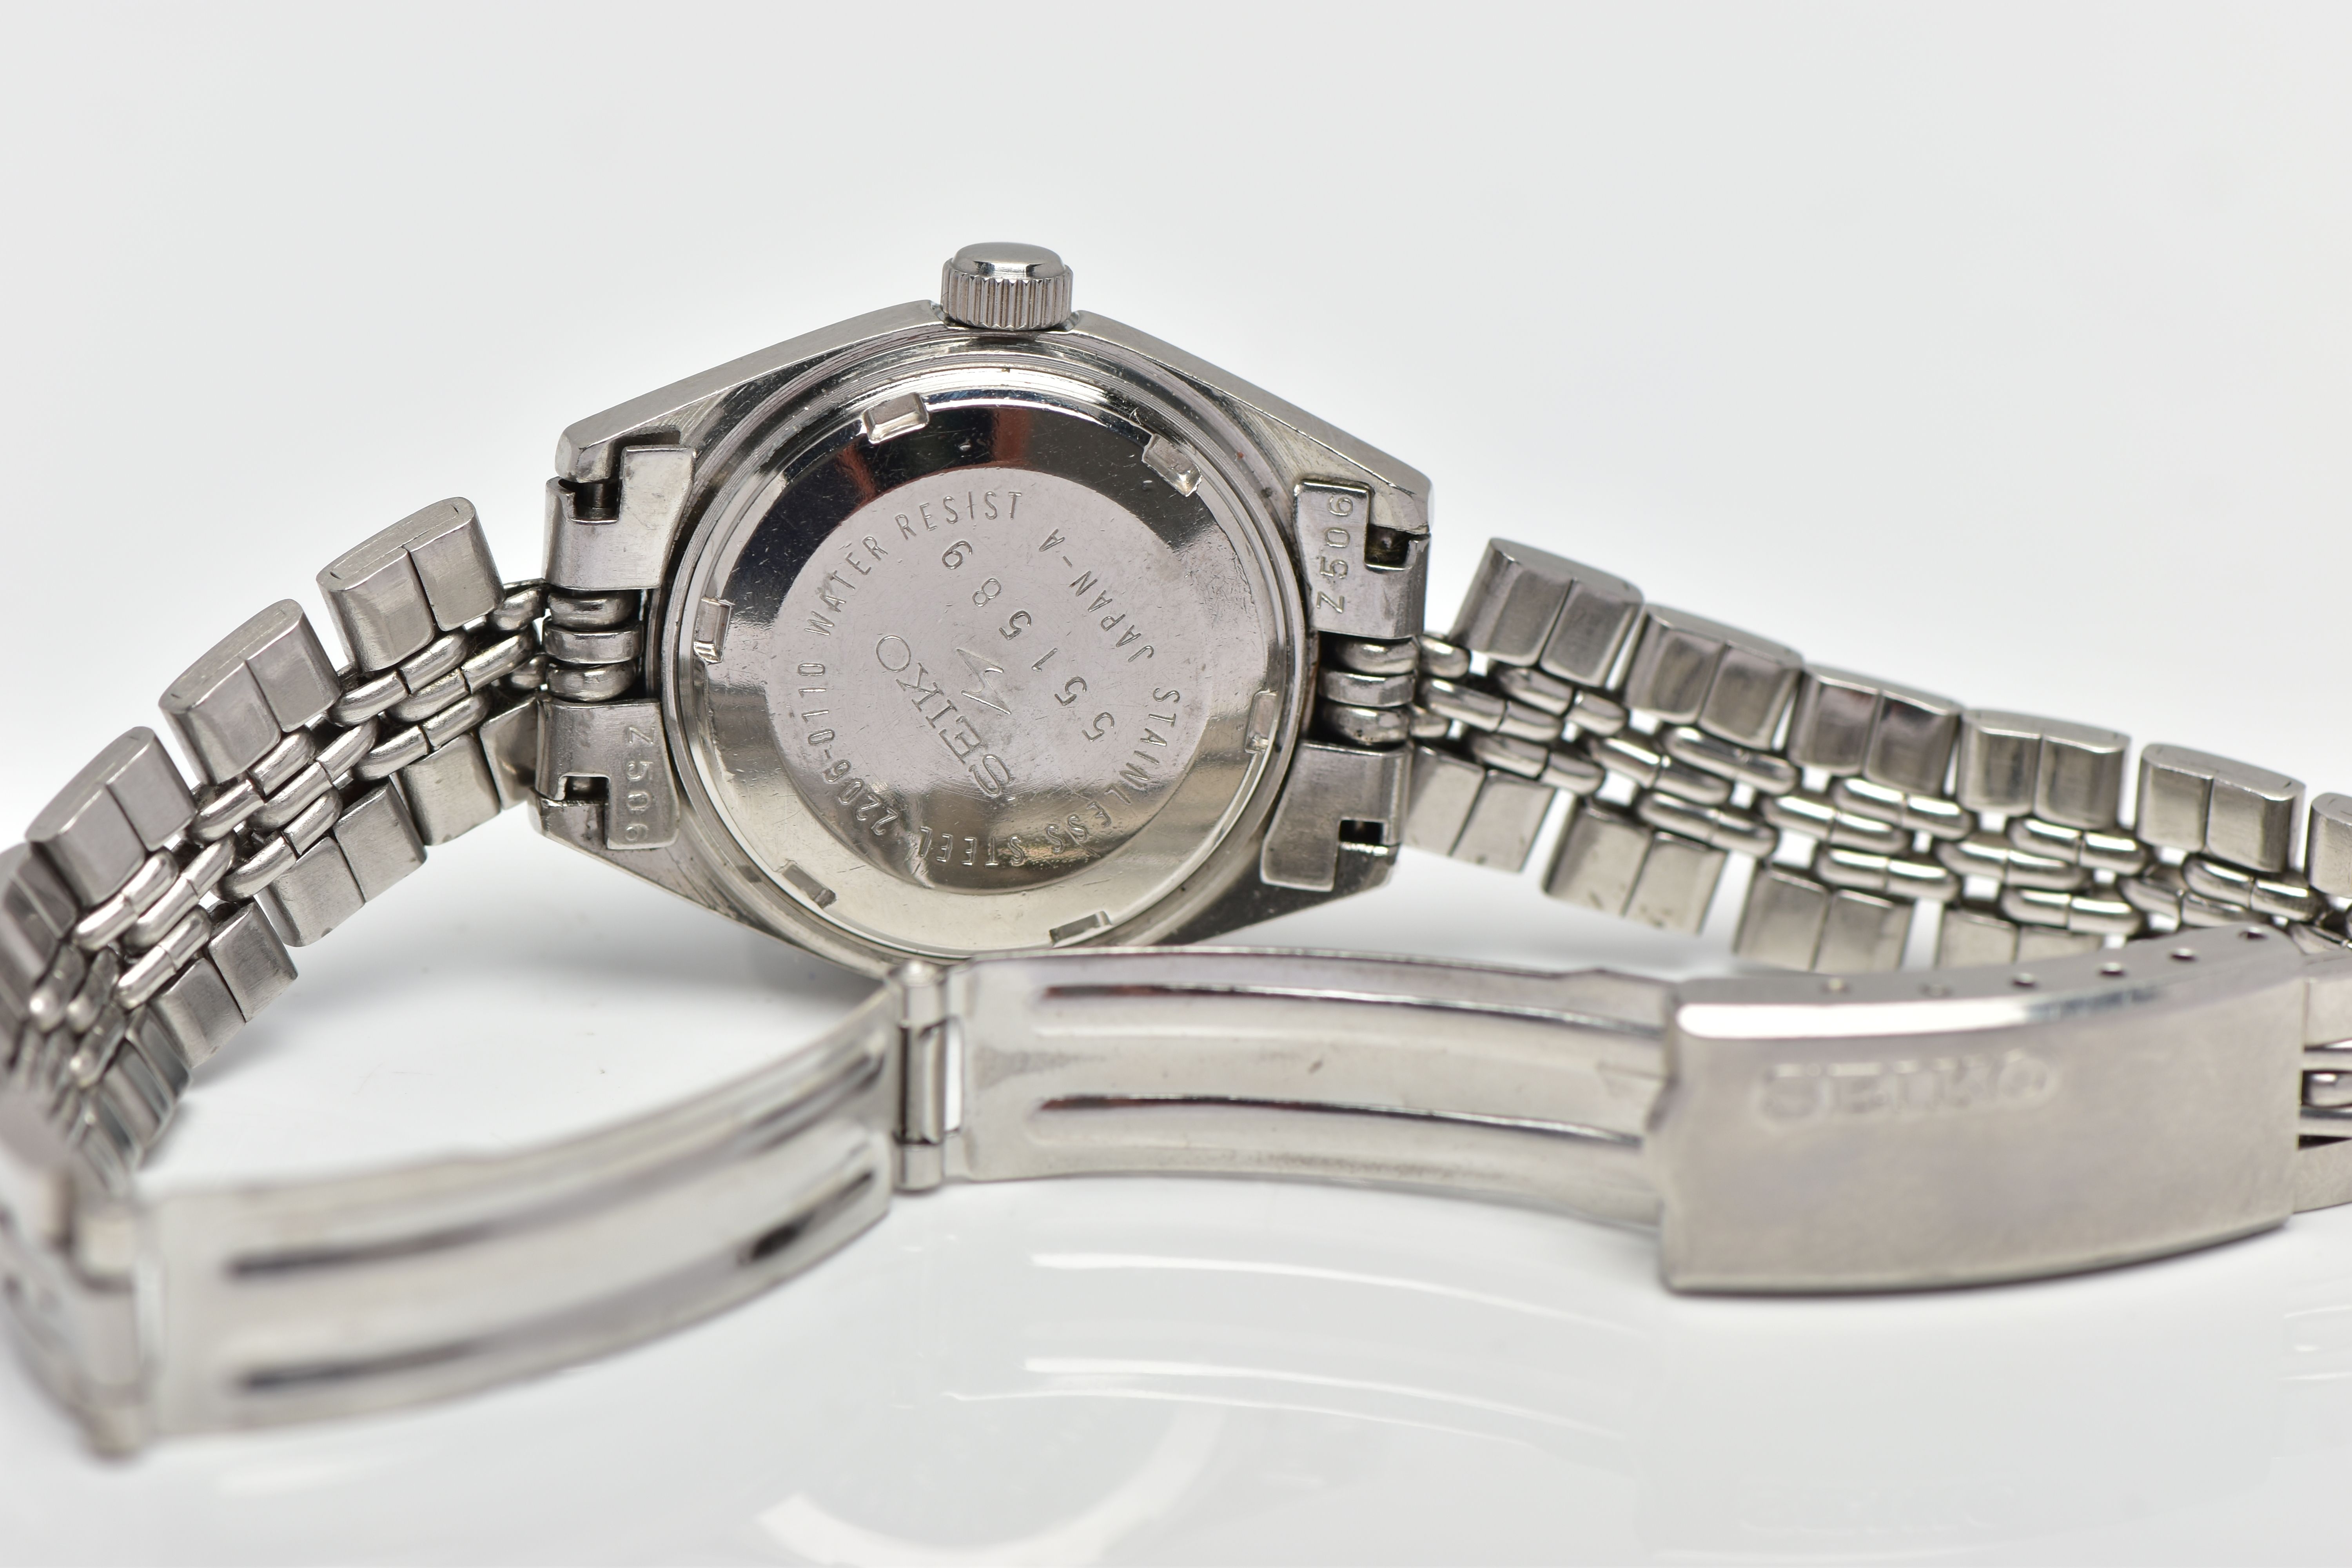 A LADIES 'SEIKO AUTOMATIC' WRISTWATCH, round silver dial signed 'Seiko automatic', day/date window - Image 5 of 6